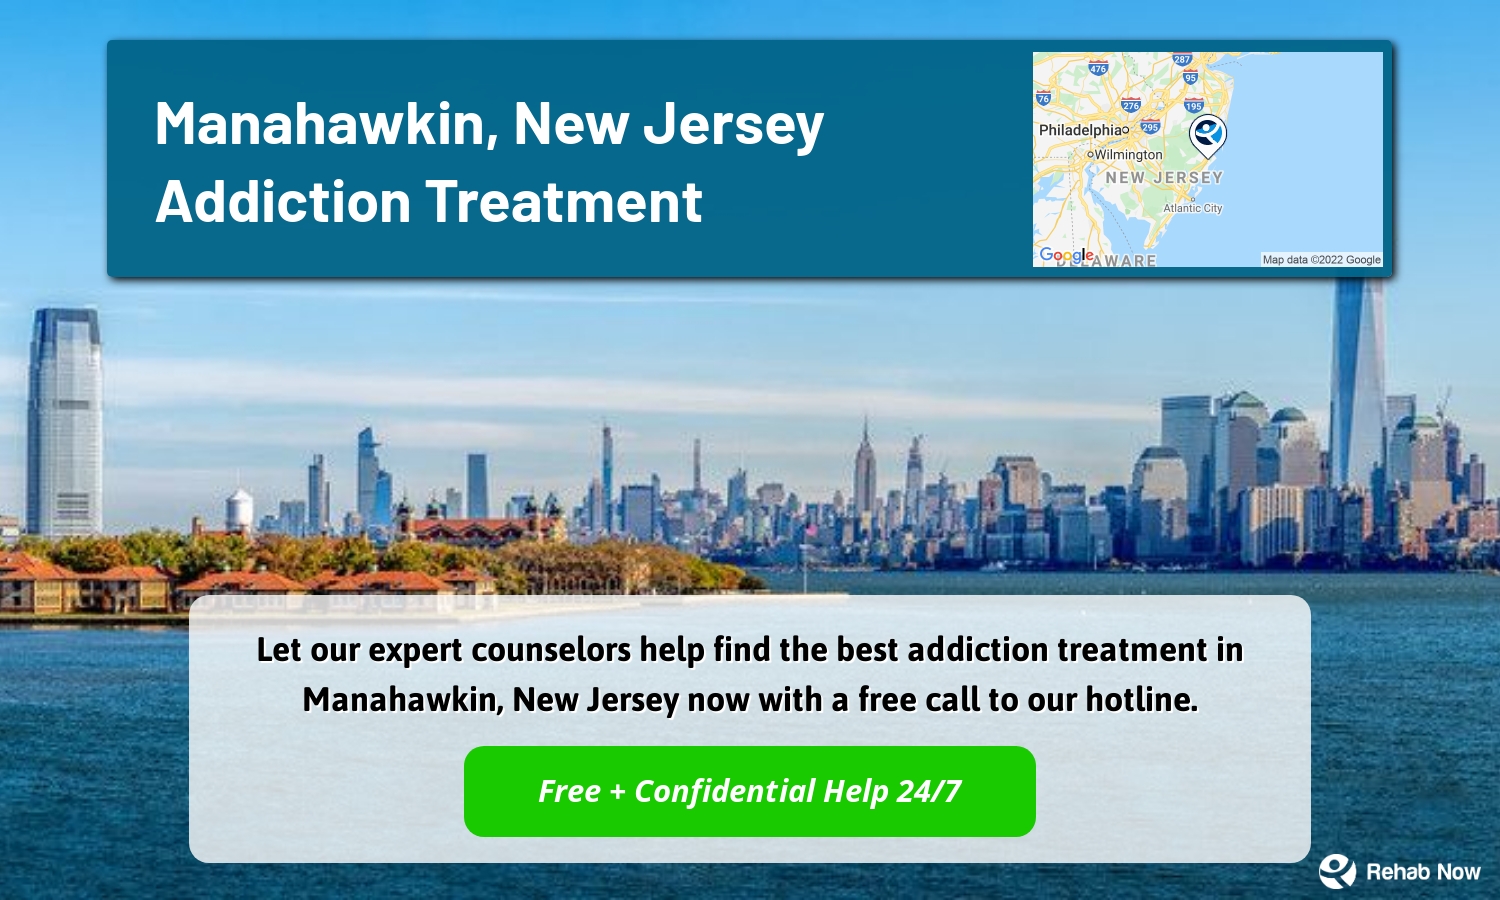 Let our expert counselors help find the best addiction treatment in Manahawkin, New Jersey now with a free call to our hotline.